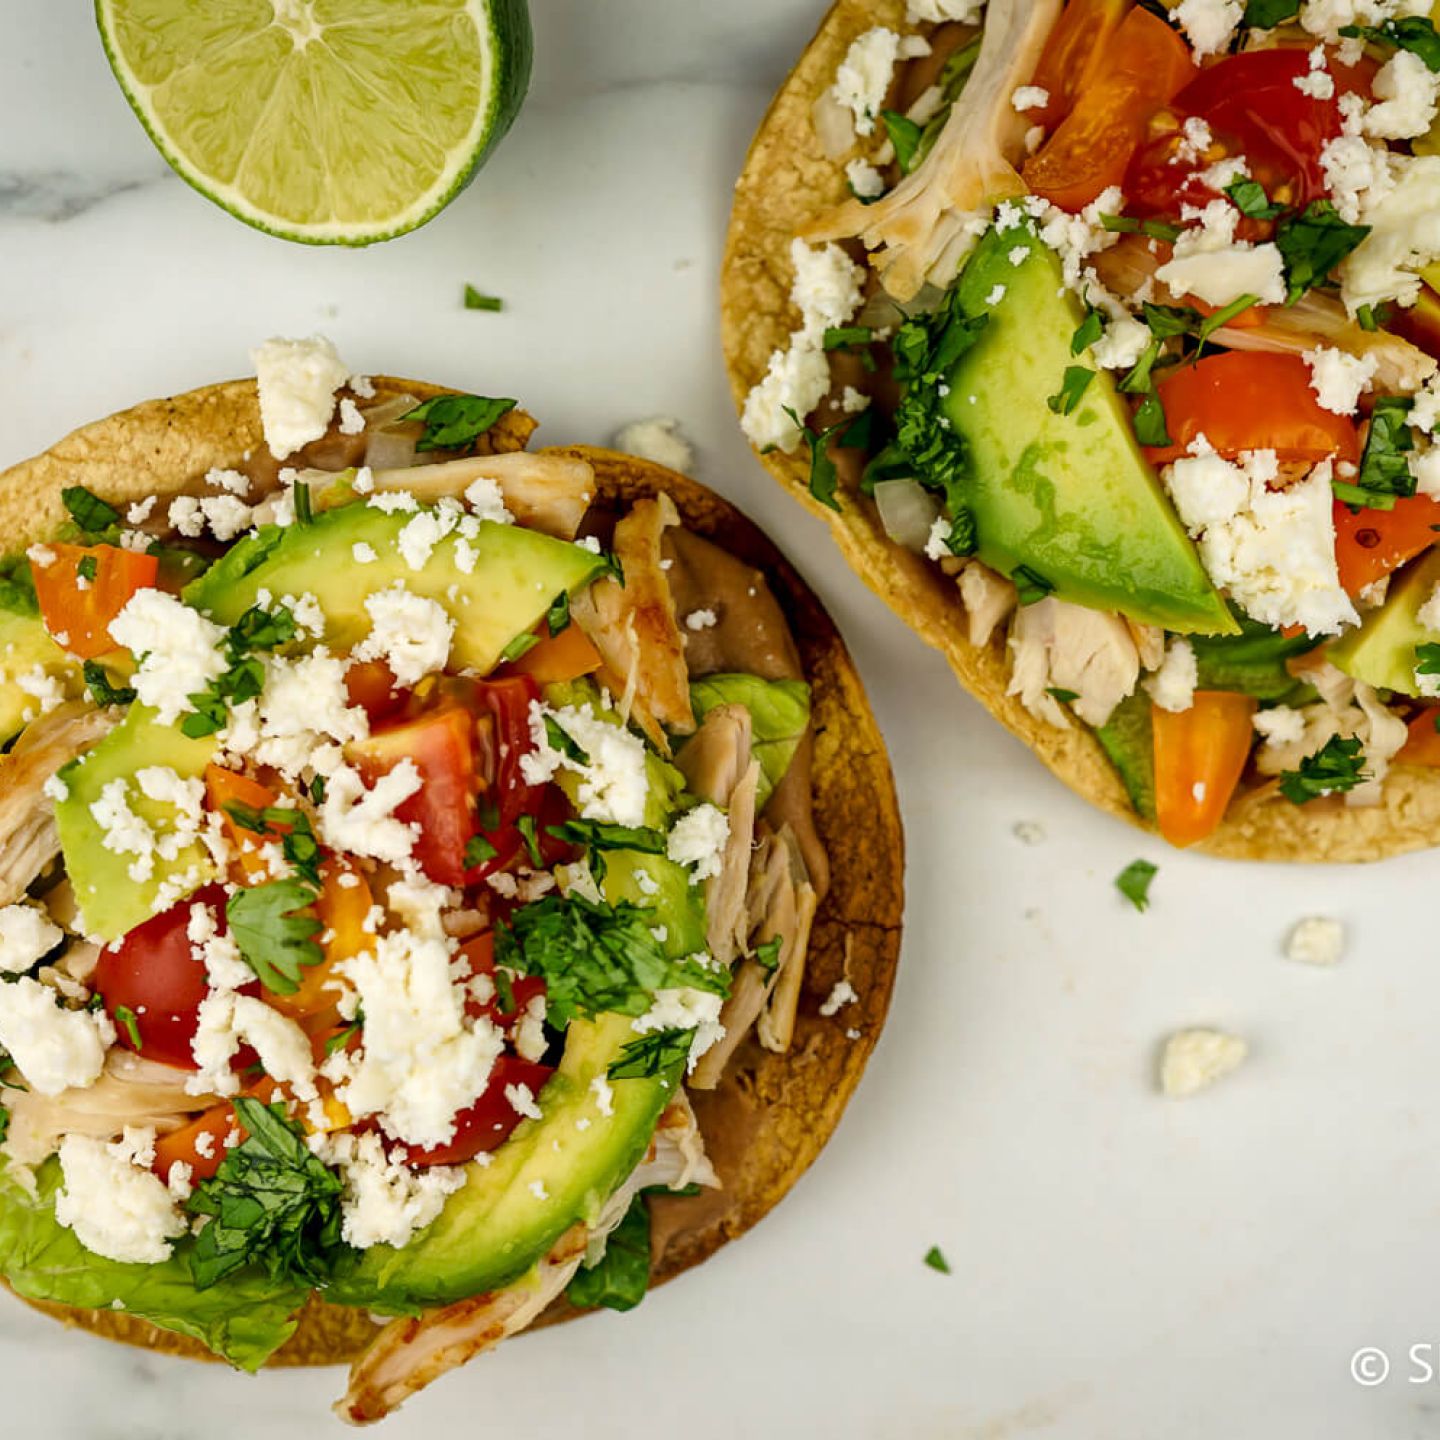 Chicken tostadas with refried beans, chicken, lettuce, salsa, cheese, and cilantro.